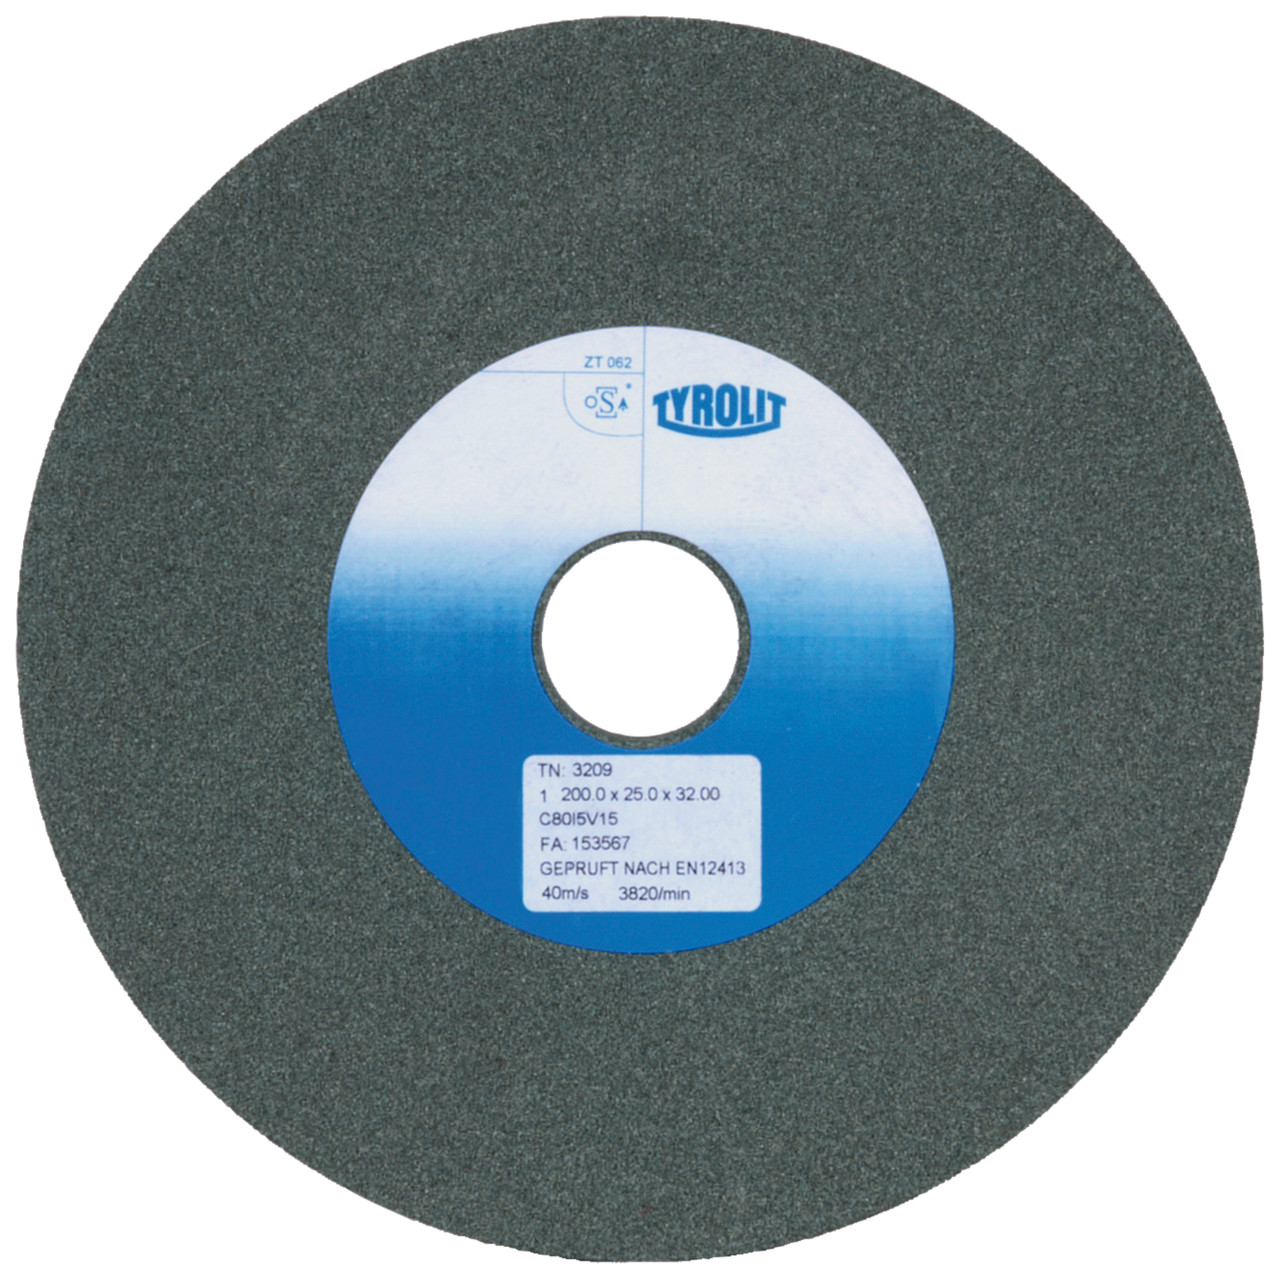 Tyrolit Conventional ceramic grinding discs DxDxH 200x25x20 For carbide and cast iron, shape: 1, Art. 3186